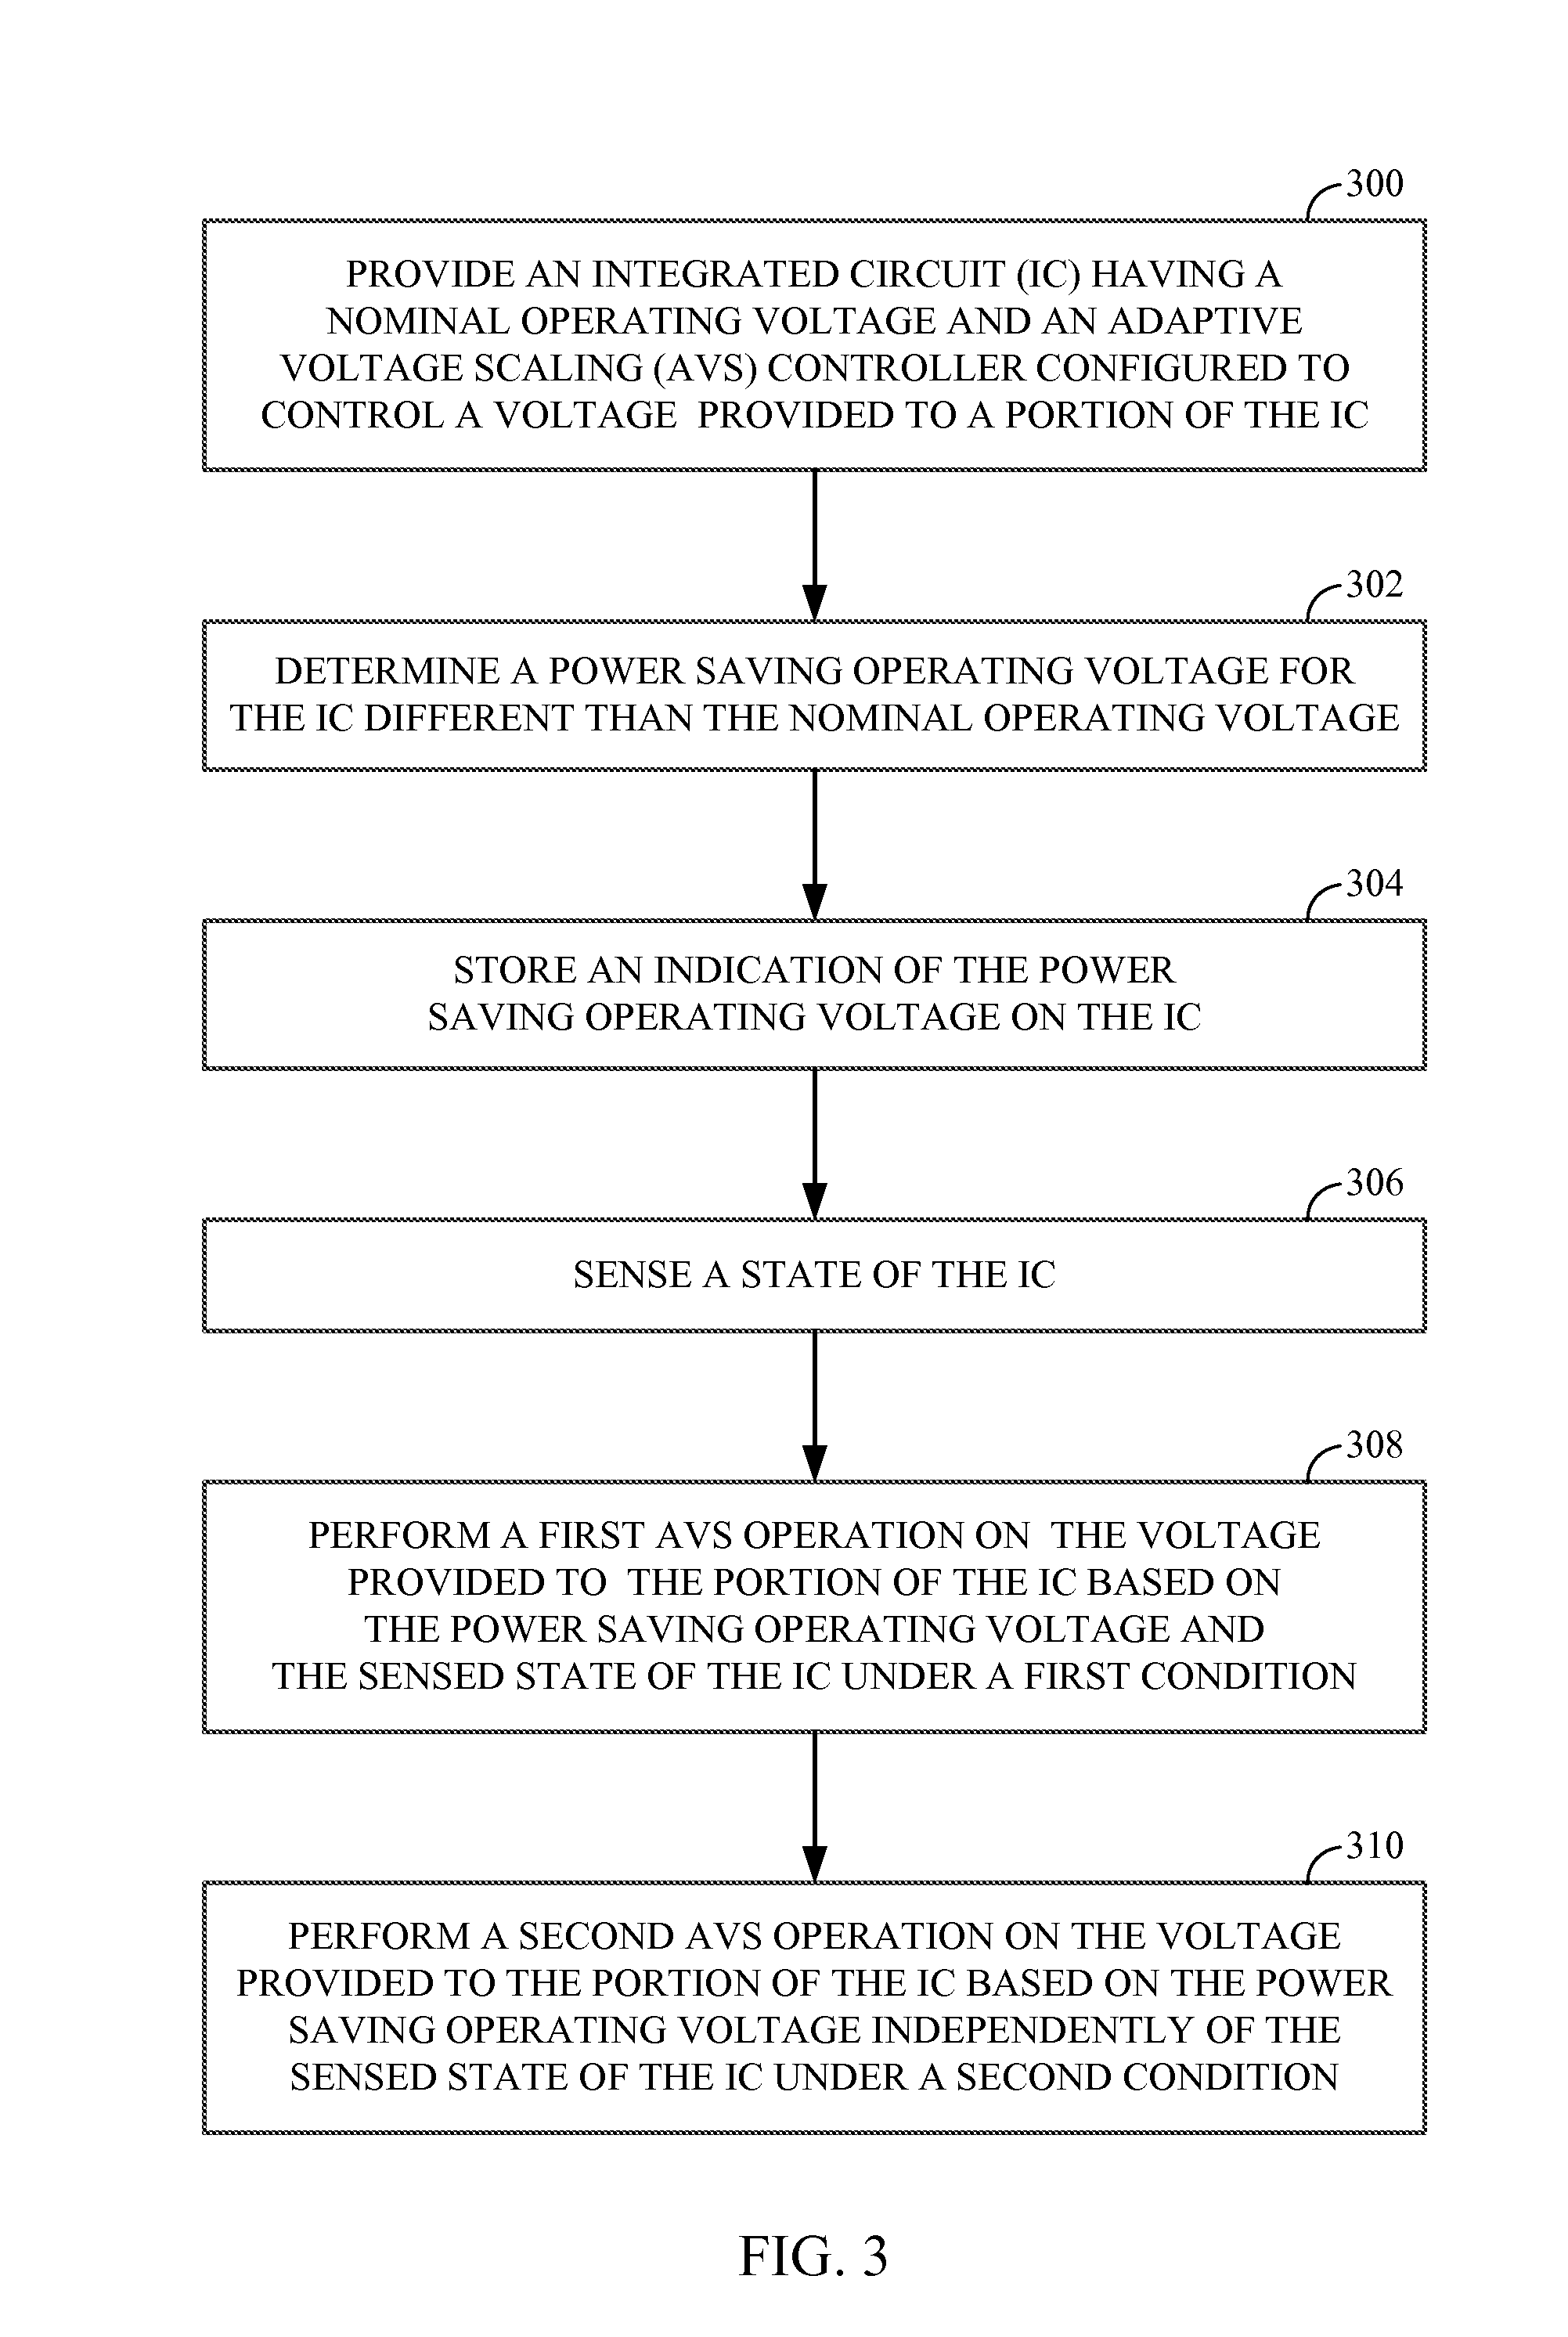 Method for performing adaptive voltage scaling (AVS) and integrated circuit configured to perform avs